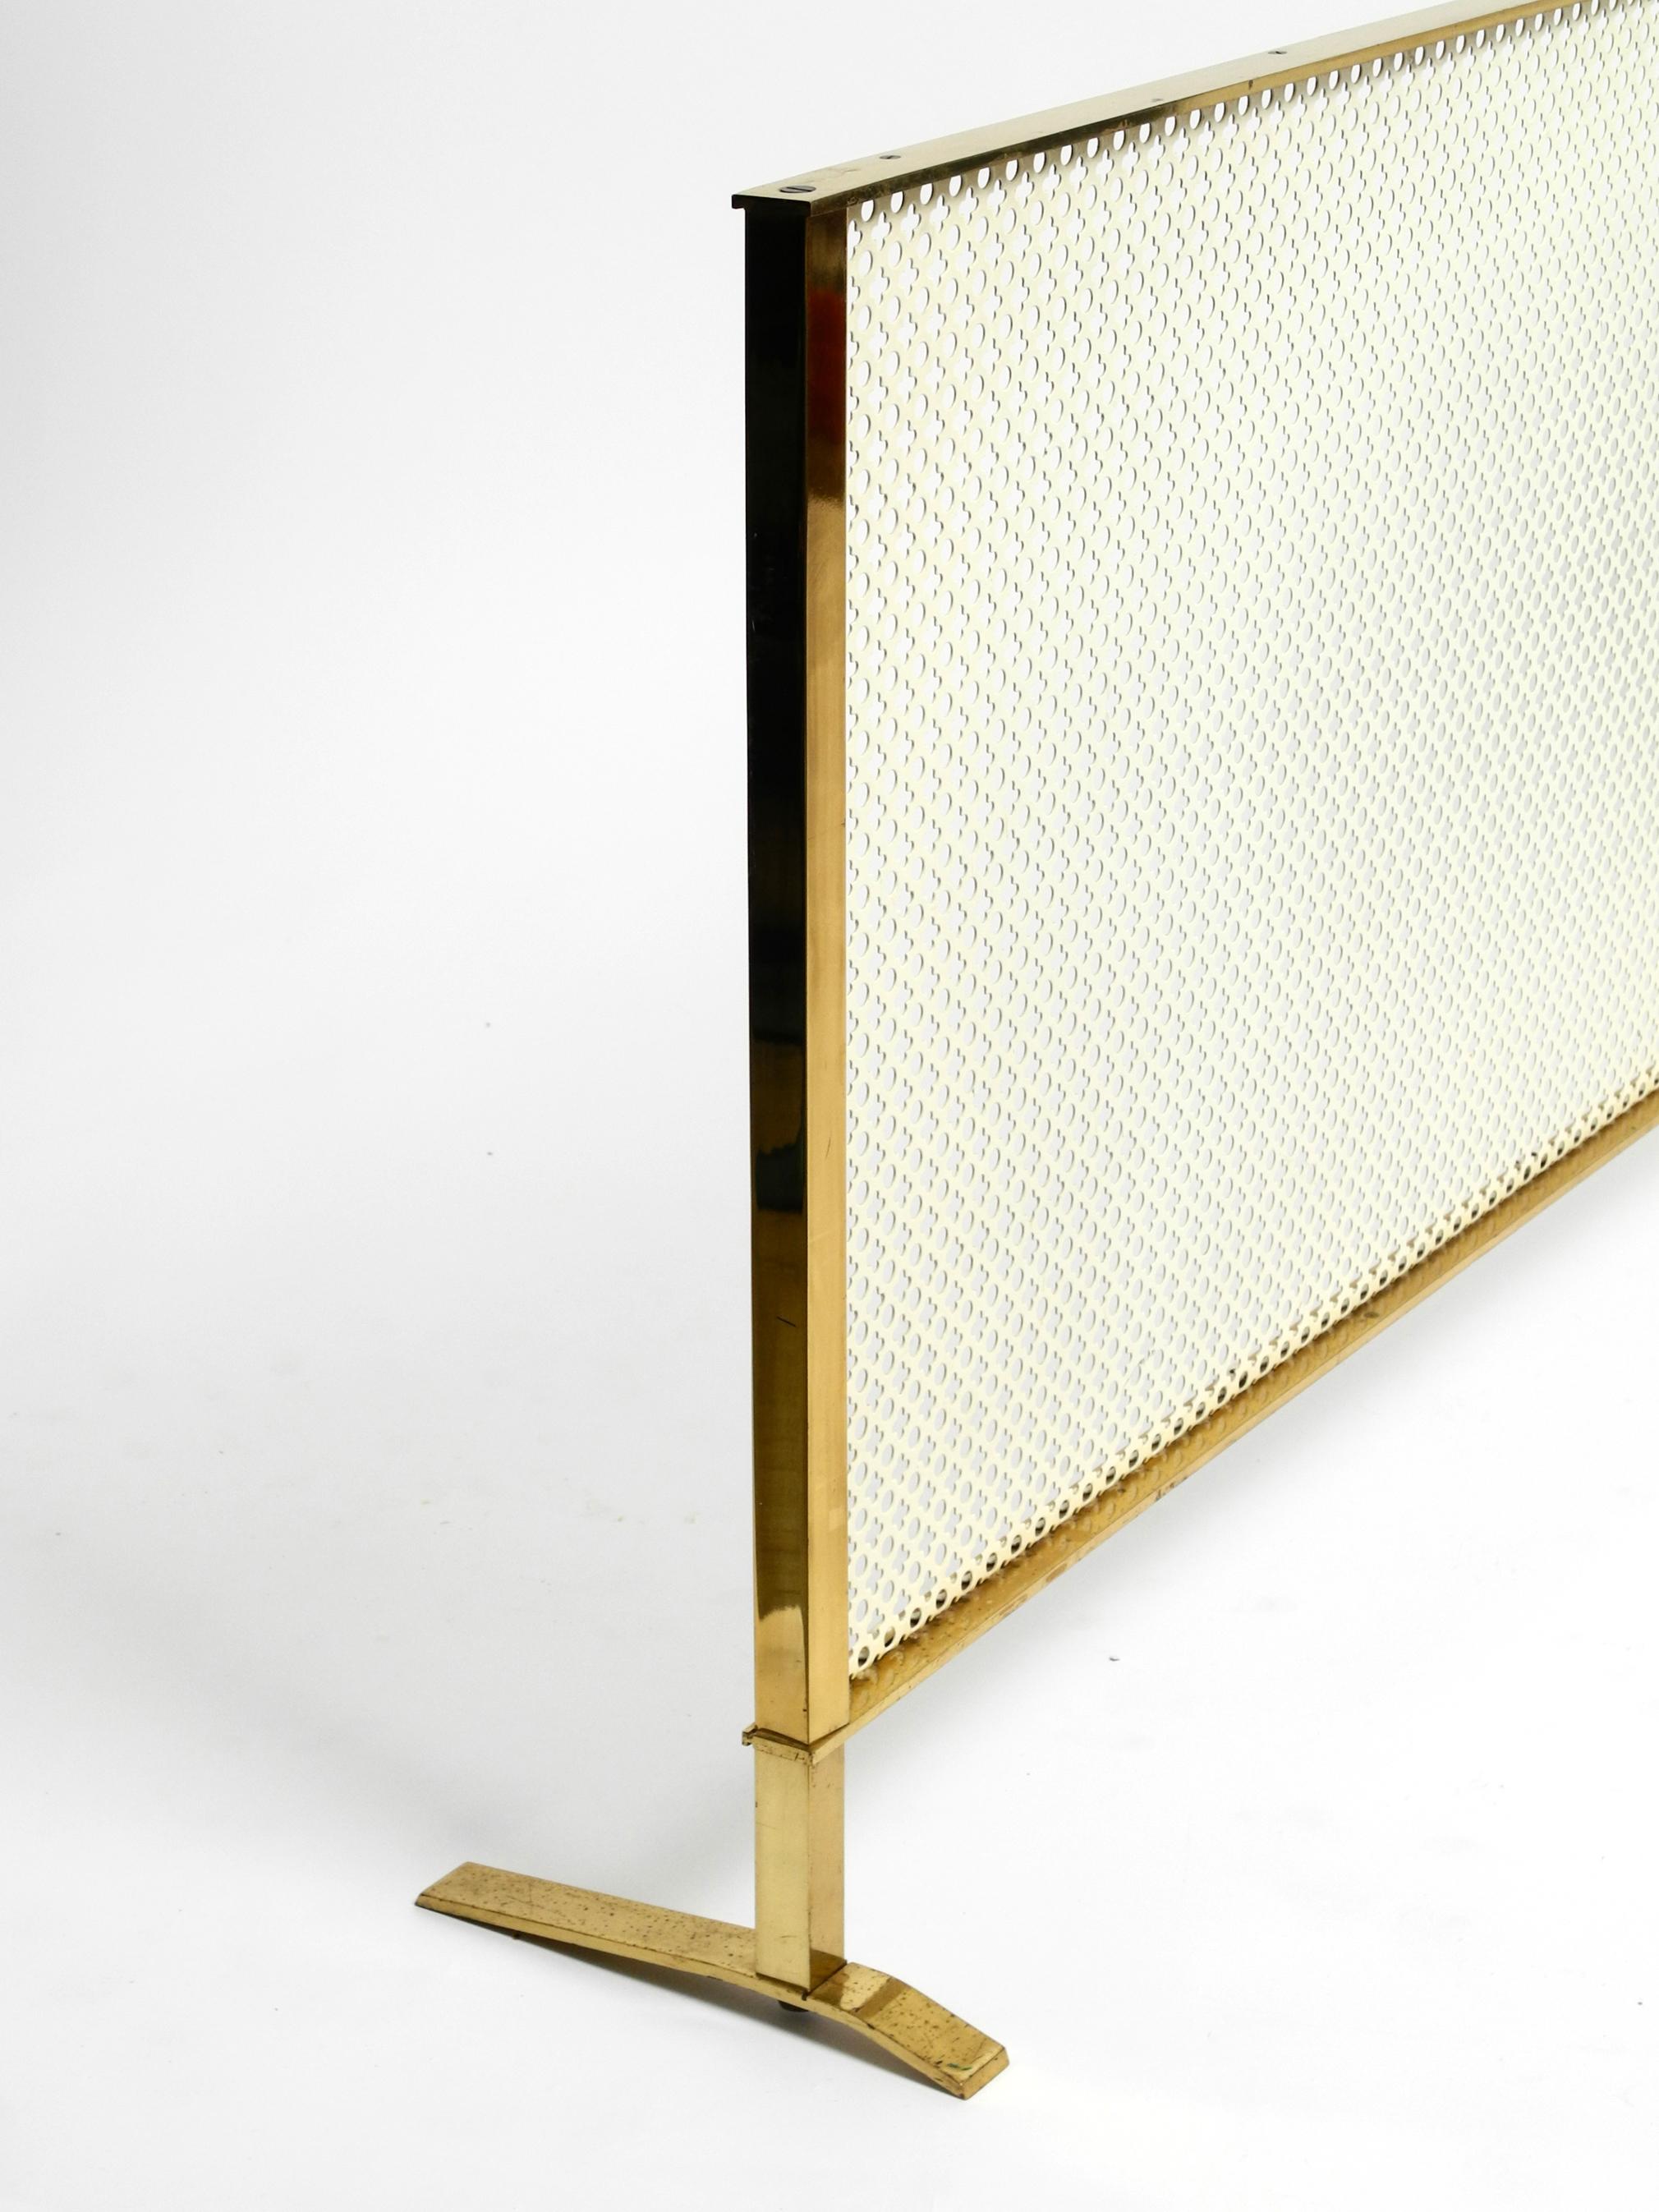 Beautiful Mid Century Radiator Covering Made of Brass and Perforated Sheet Metal In Good Condition For Sale In München, DE